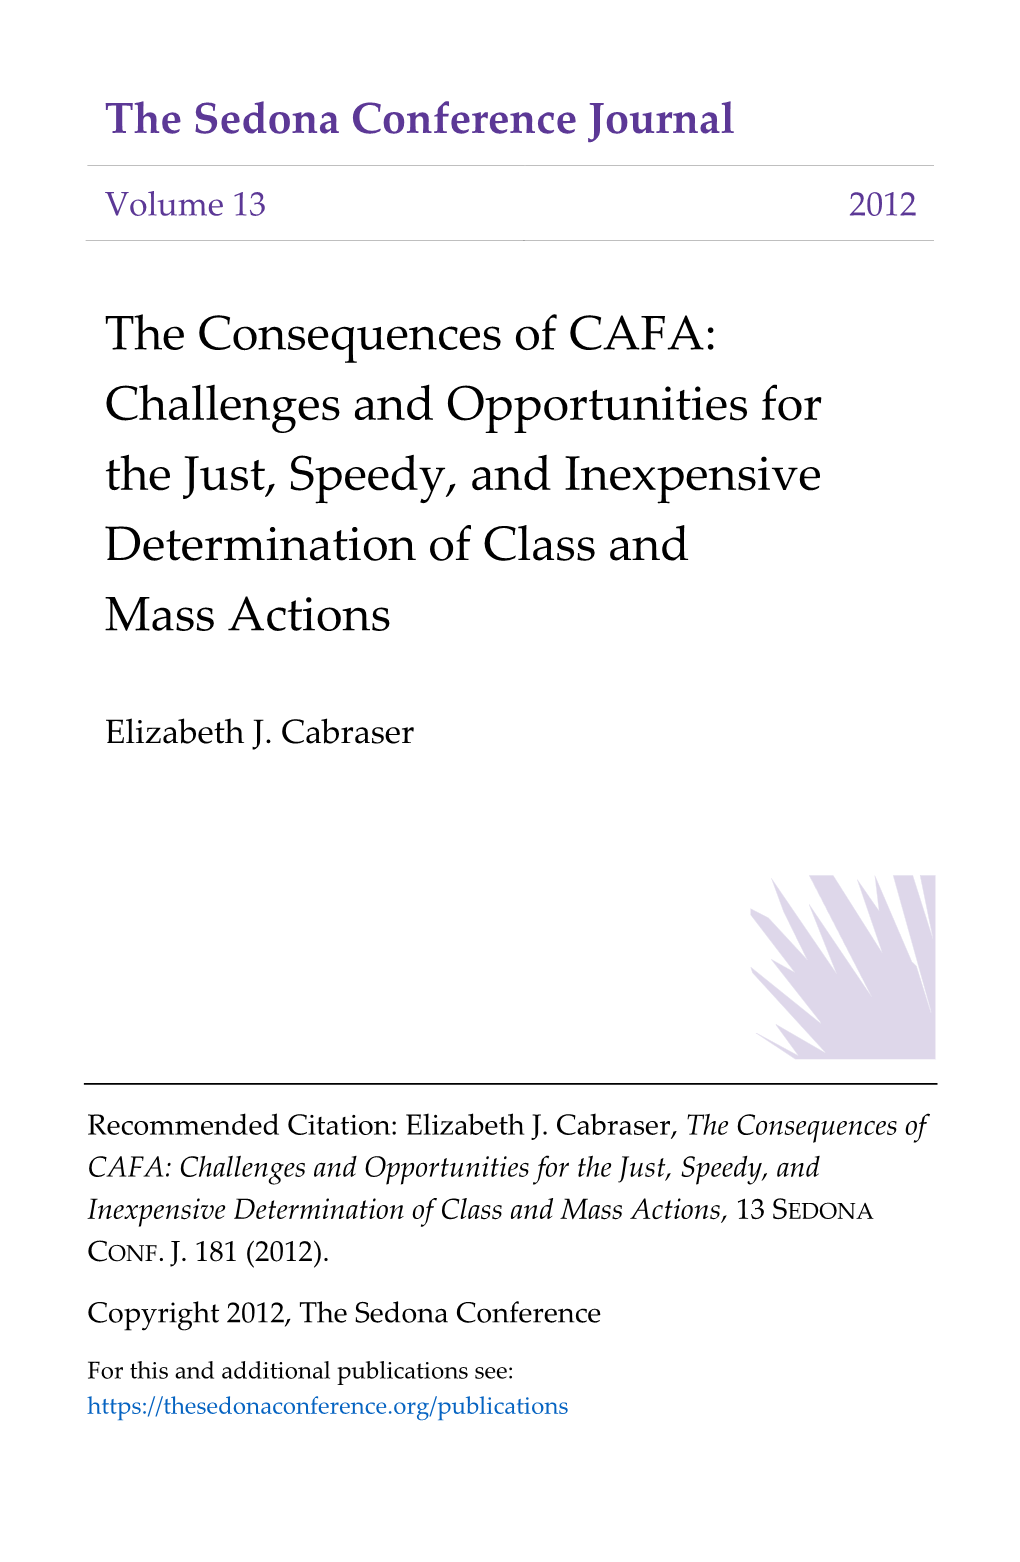 The Consequences of CAFA: Challenges and Opportunities for the Just, Speedy, and Inexpensive Determination of Class and Mass Actions